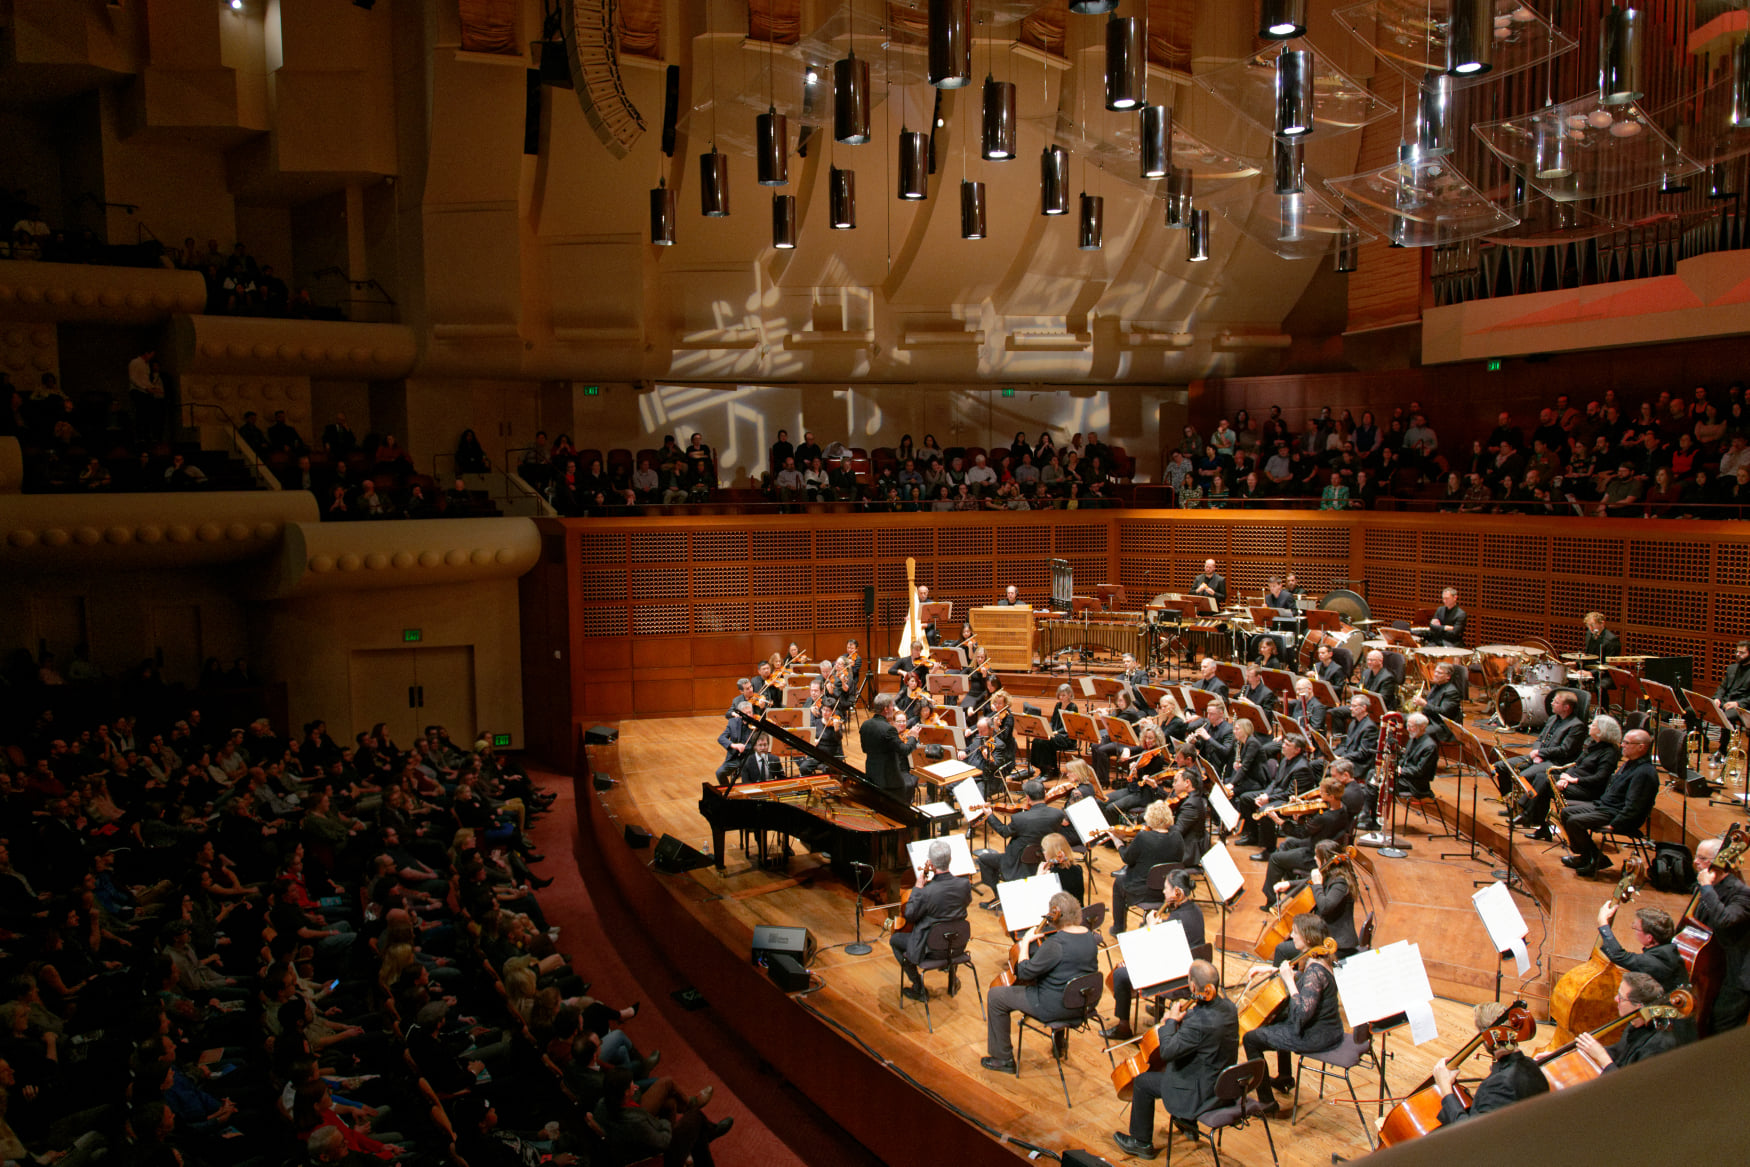 San Francisco Symphony's 20 Tickets for 2020